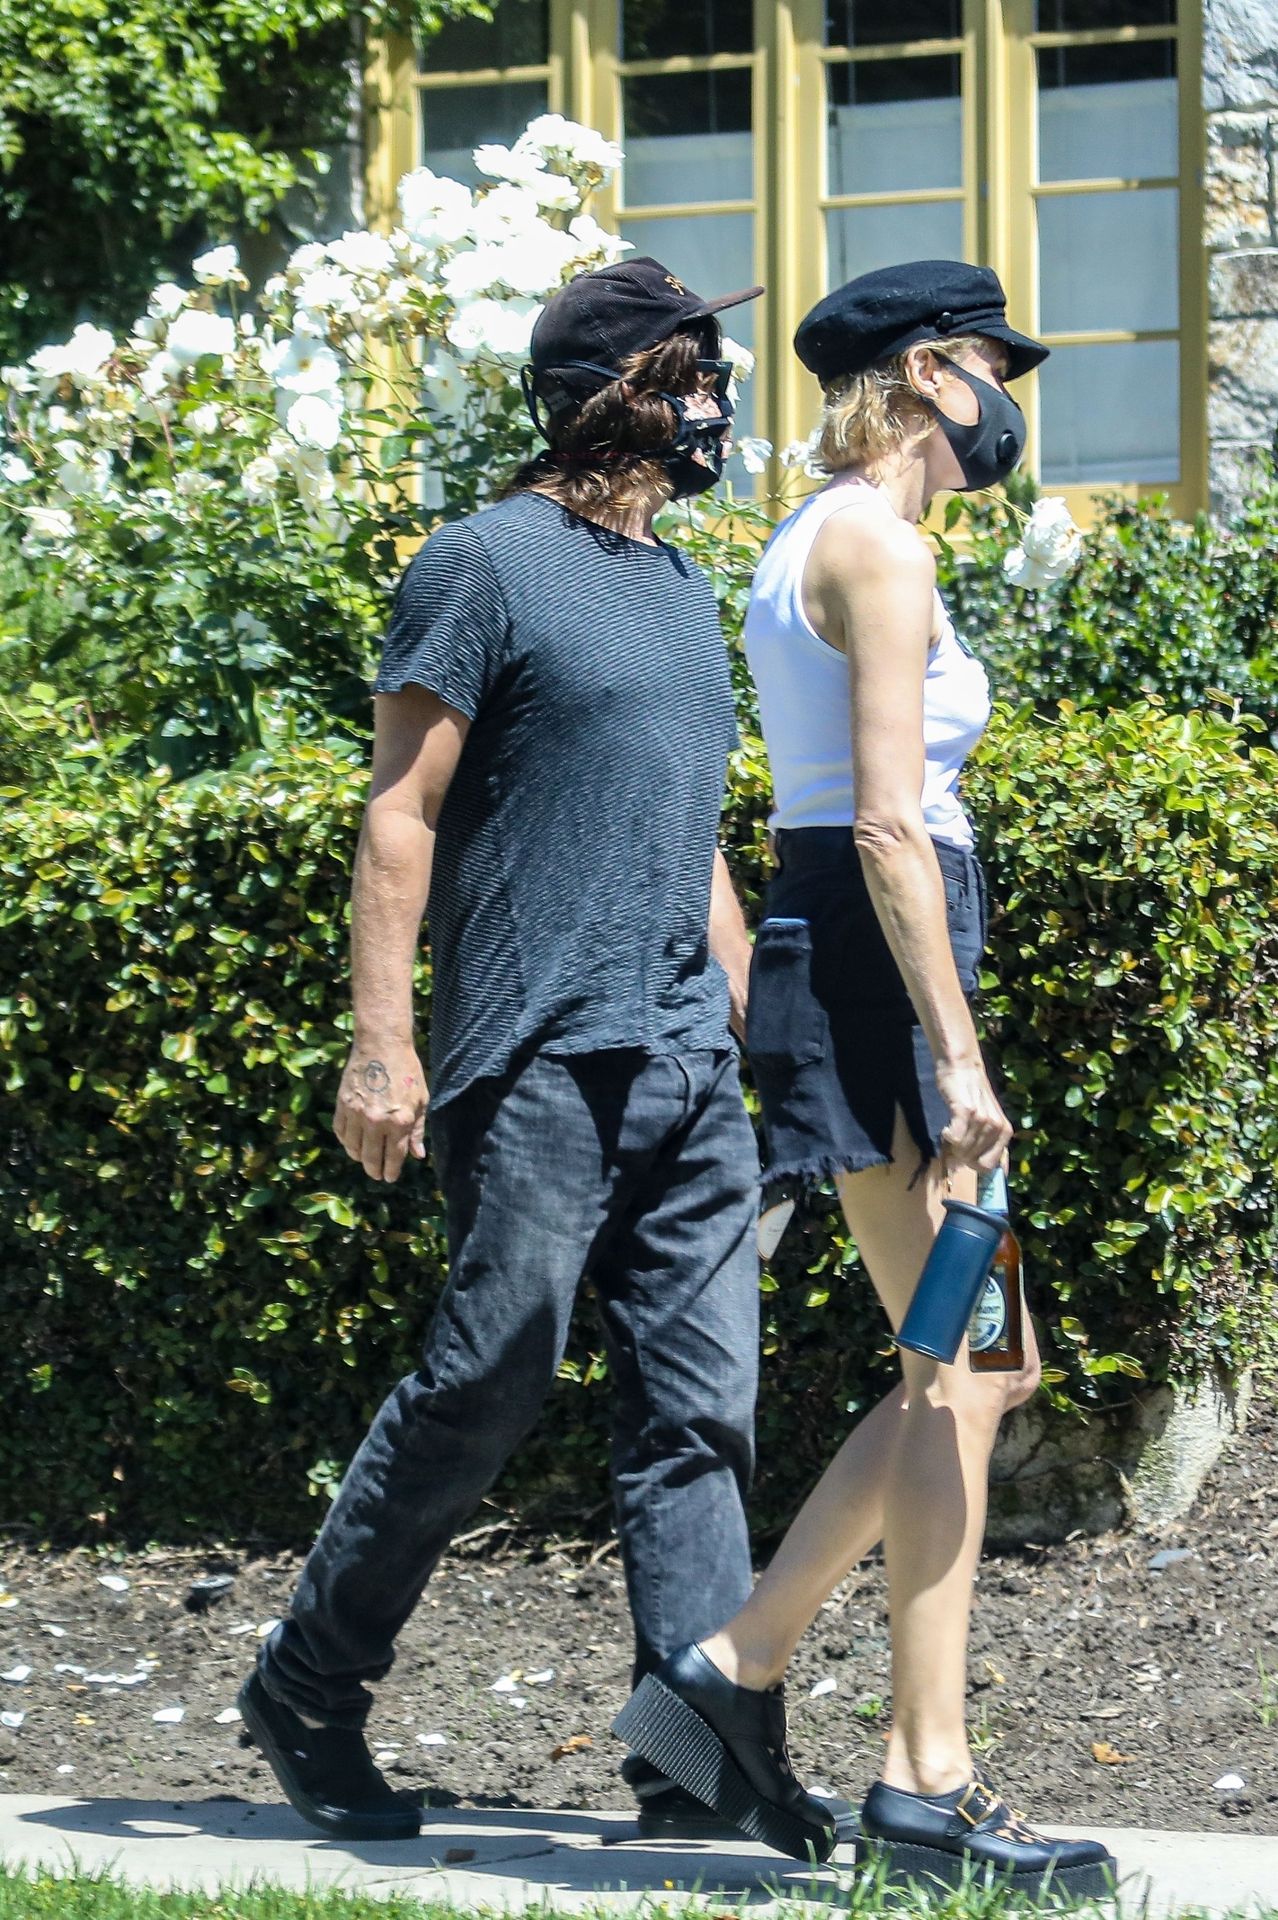 Diane Kruger  Norman Reedus Attend a House Party During the COVID-19 Outbreak (27 Photos)